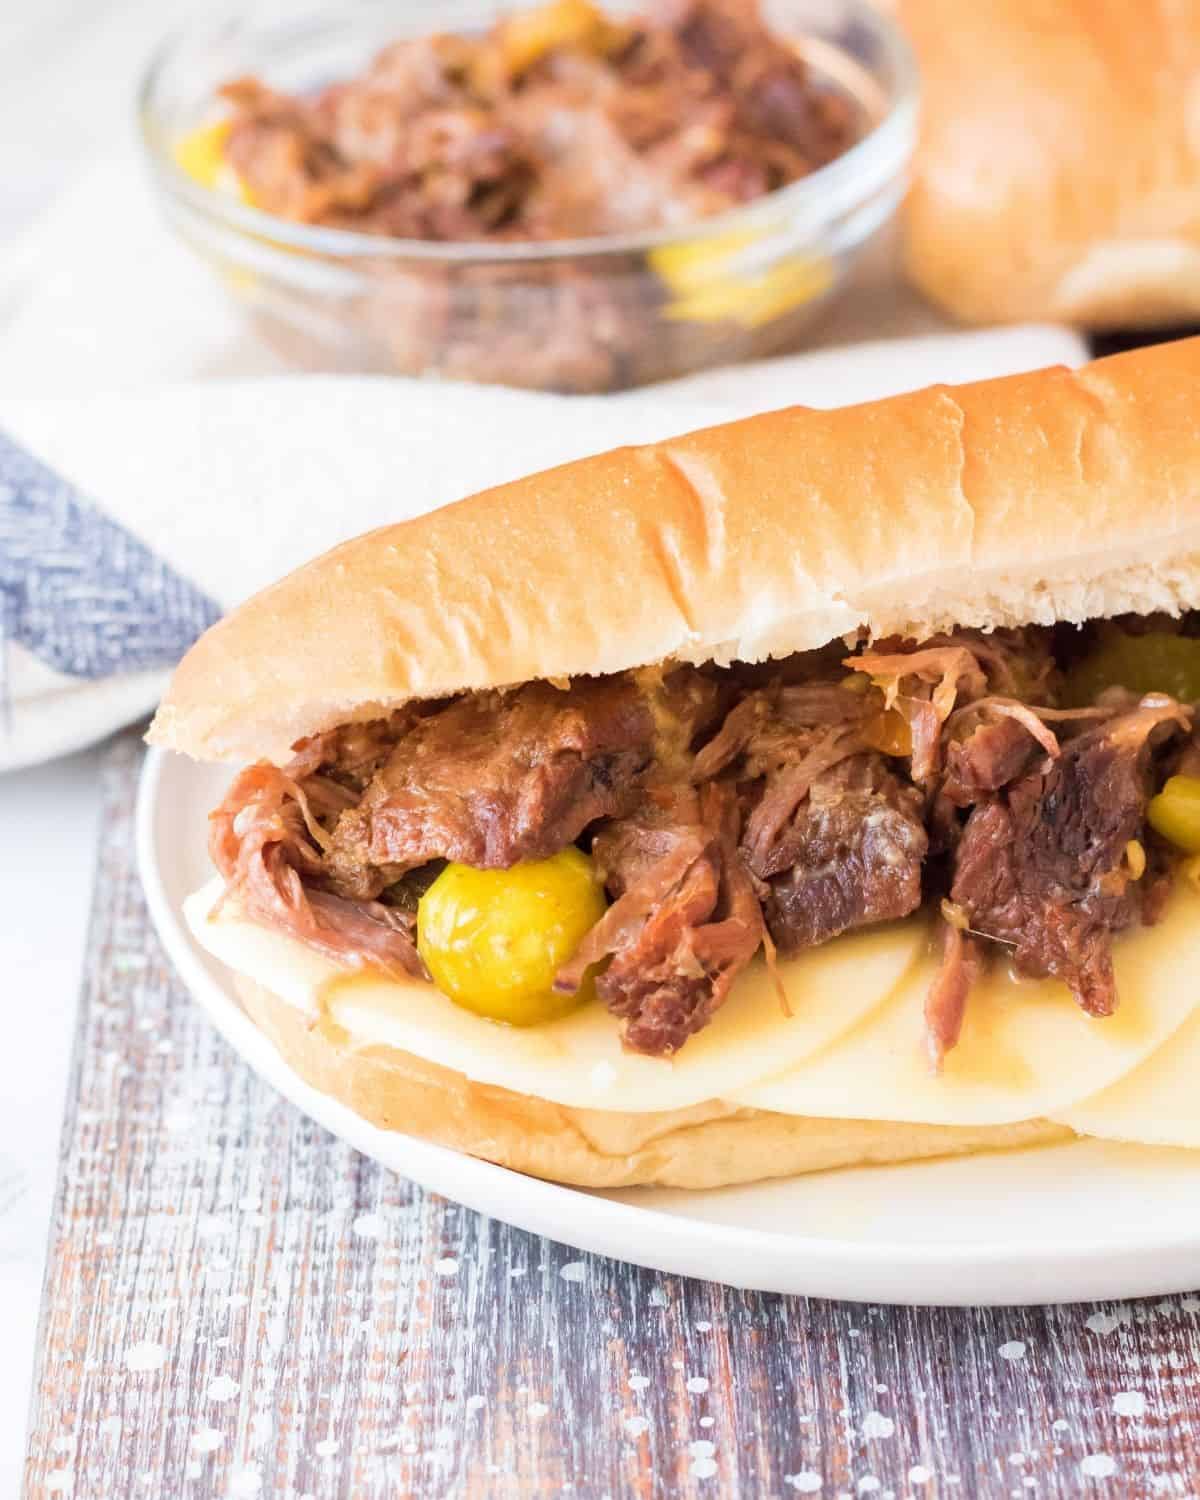 Slow cooker Italian beef made into a hoagie with pepperocini and provolone cheese.